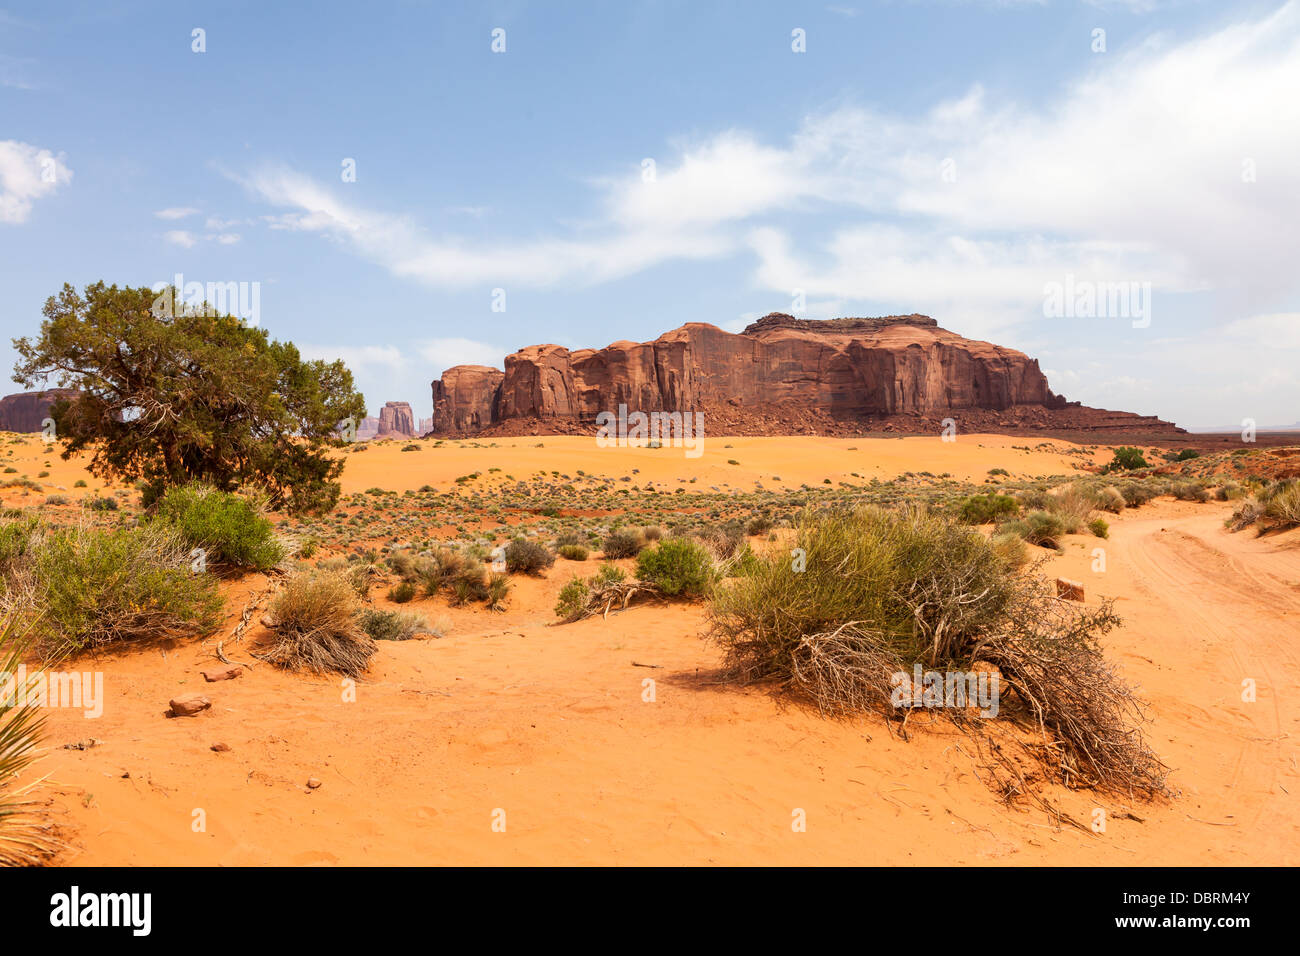 Monument Valley mesa on the Colorado Plateau, straddling the Arizona-Utah state line, South West USA Stock Photo